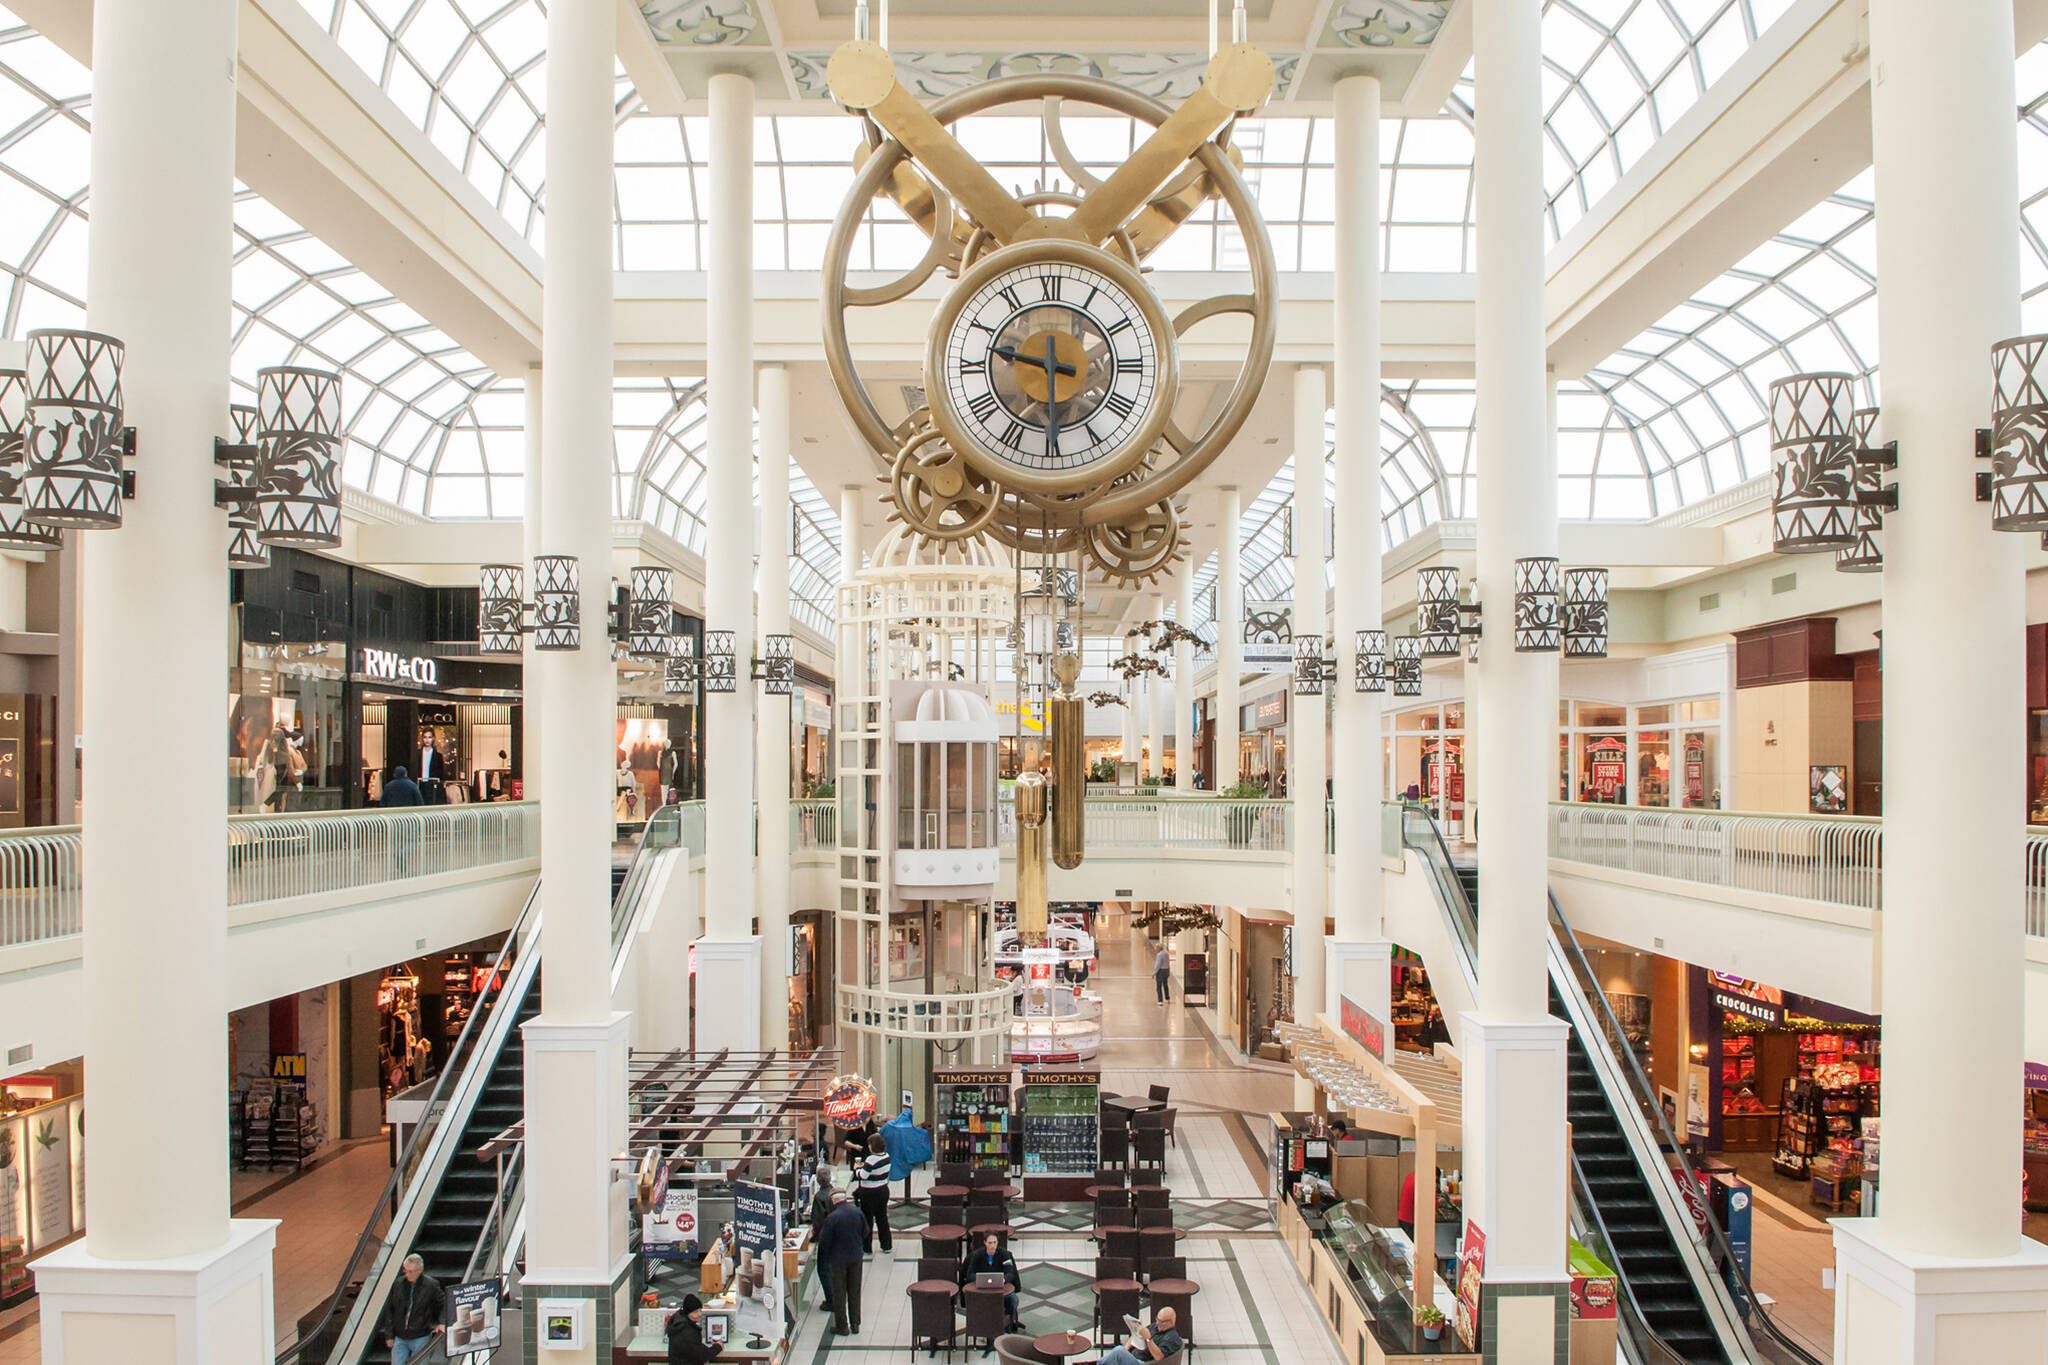 Here's a list of all the shopping malls now open near Toronto